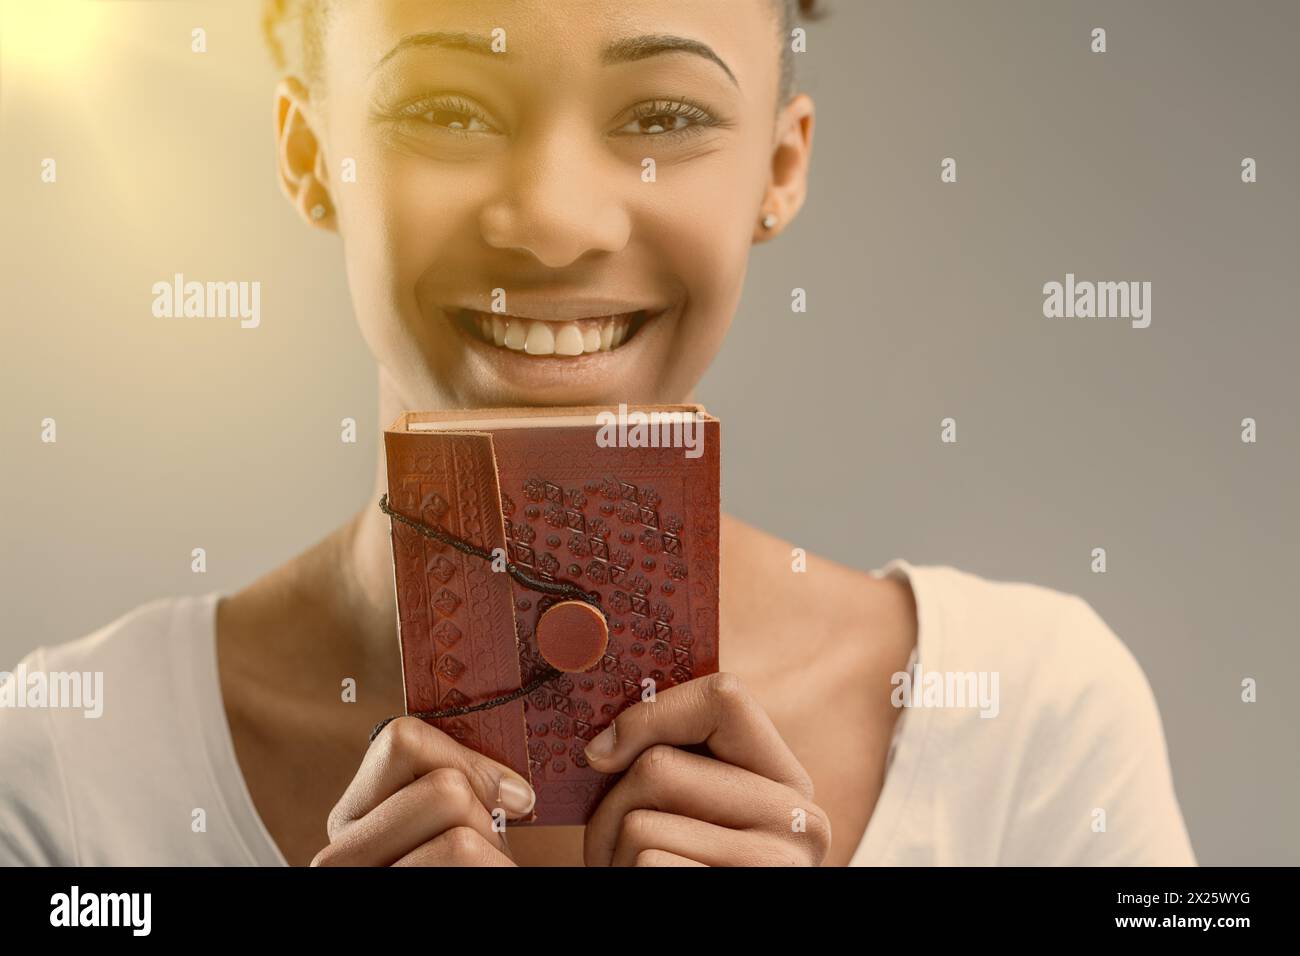 Glimpse into the soulful eyes of a young woman behind a red, embossed leather journal Stock Photo